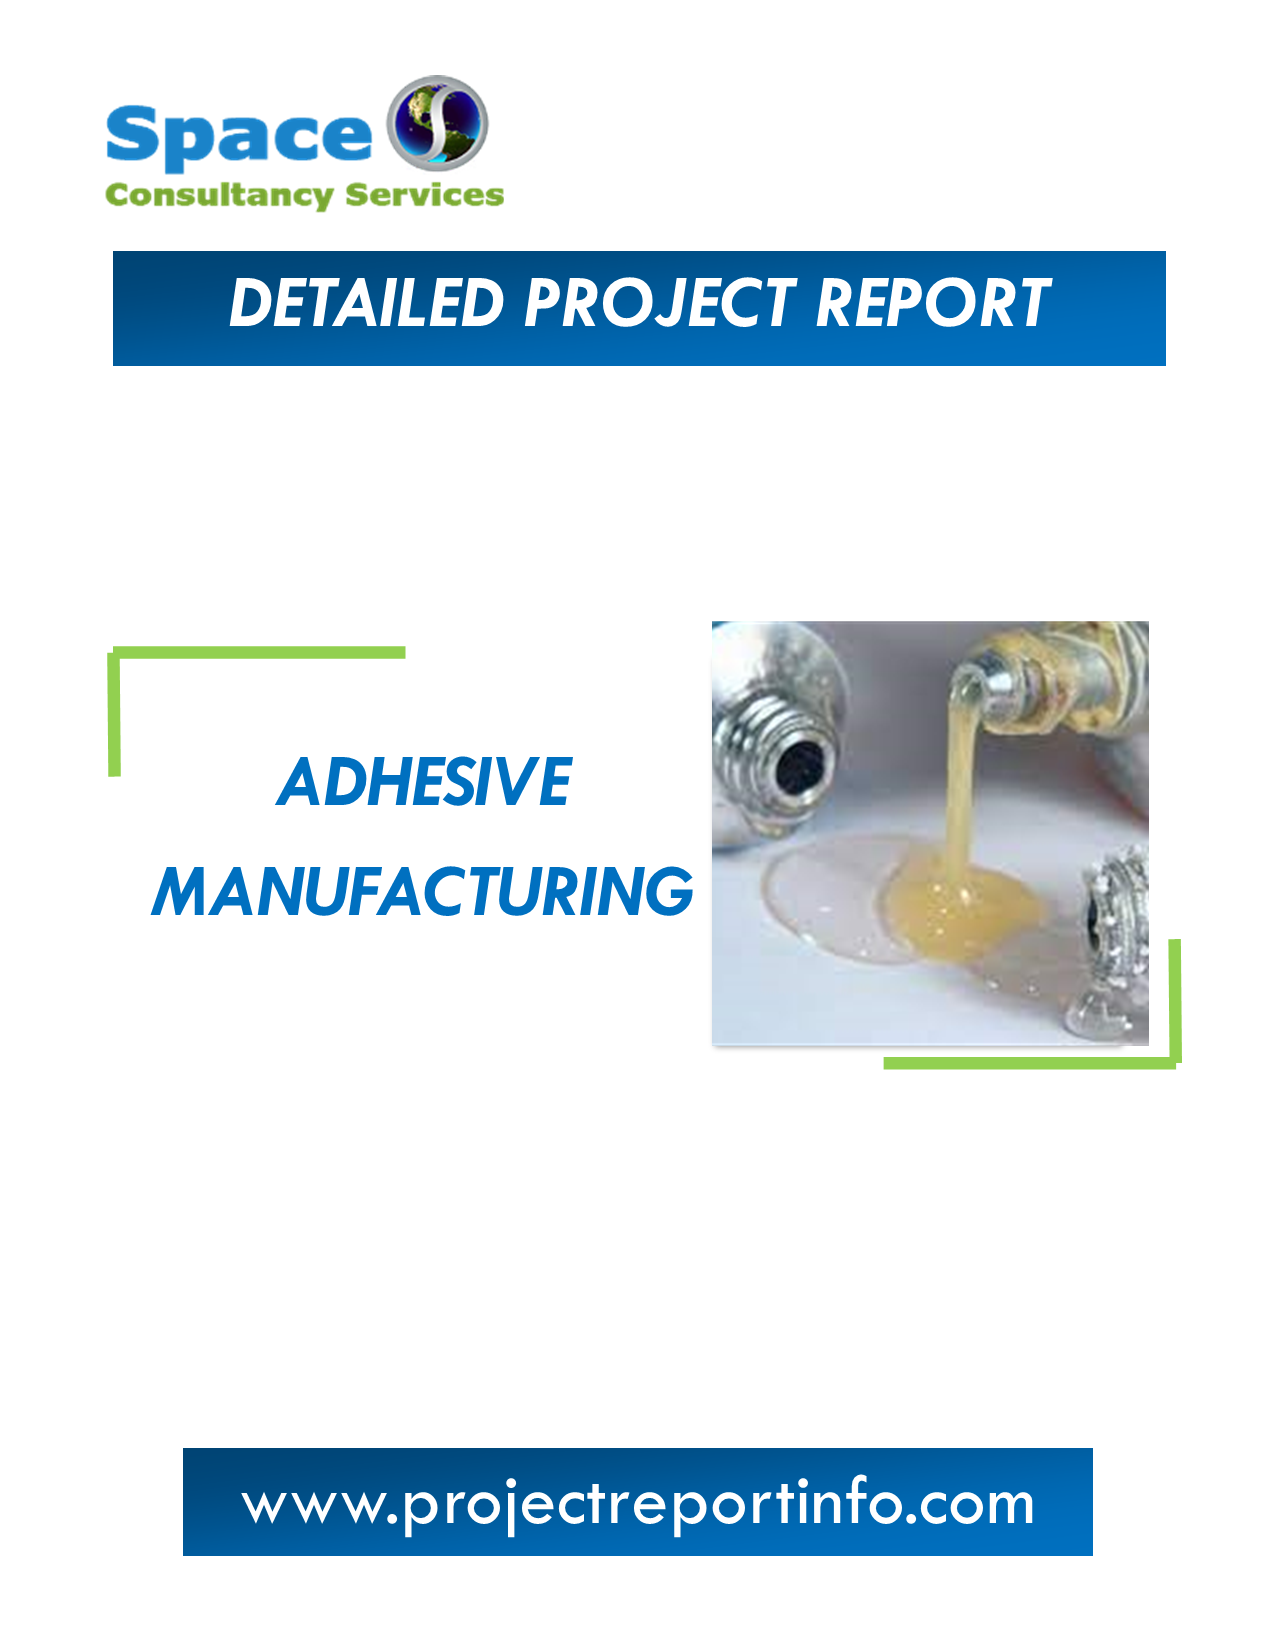 Project Report on Adhesive Manufacturing